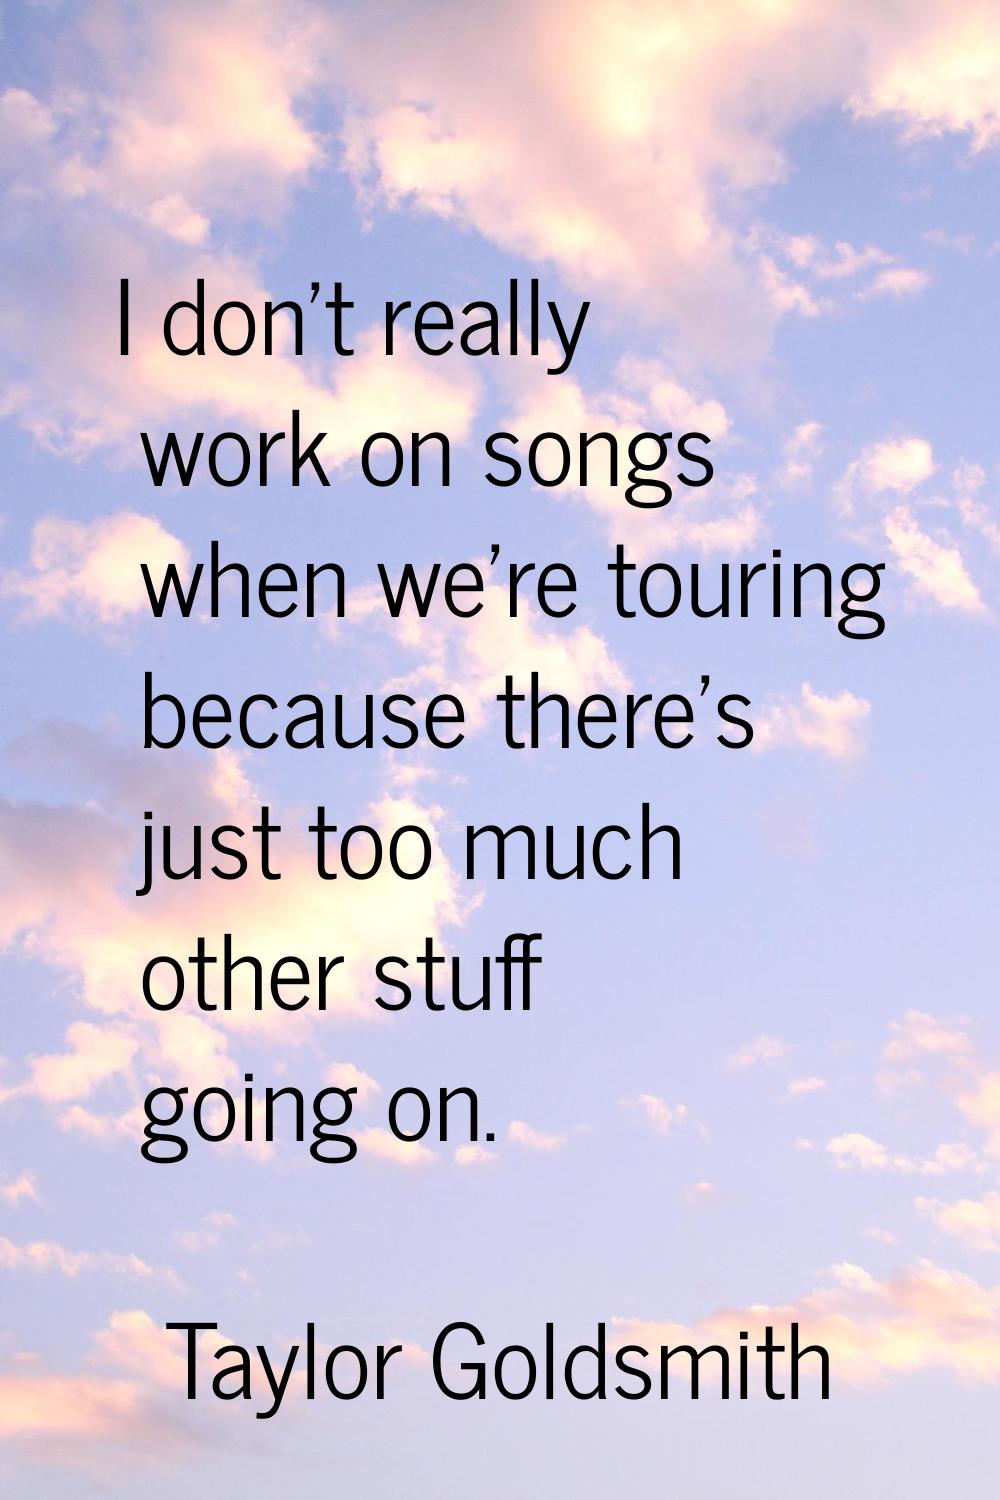 I don't really work on songs when we're touring because there's just too much other stuff going on.